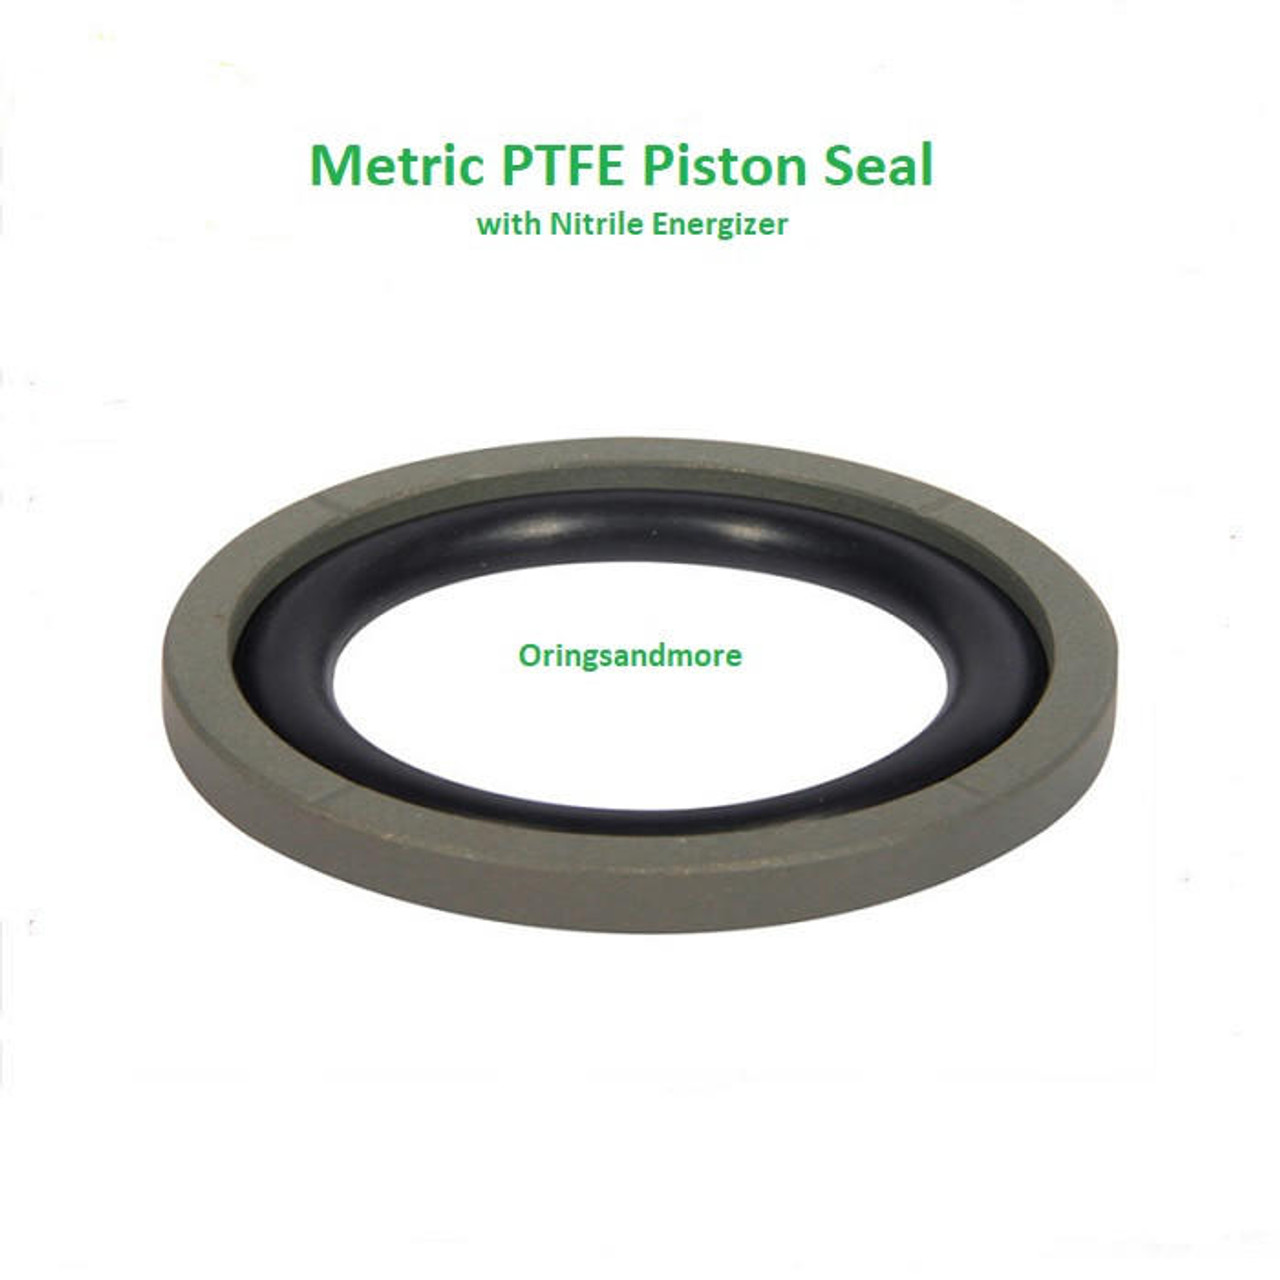 PTFE Piston Seal 10mm OD x 5.1mm ID x 2.2mm   Price for 1 pc